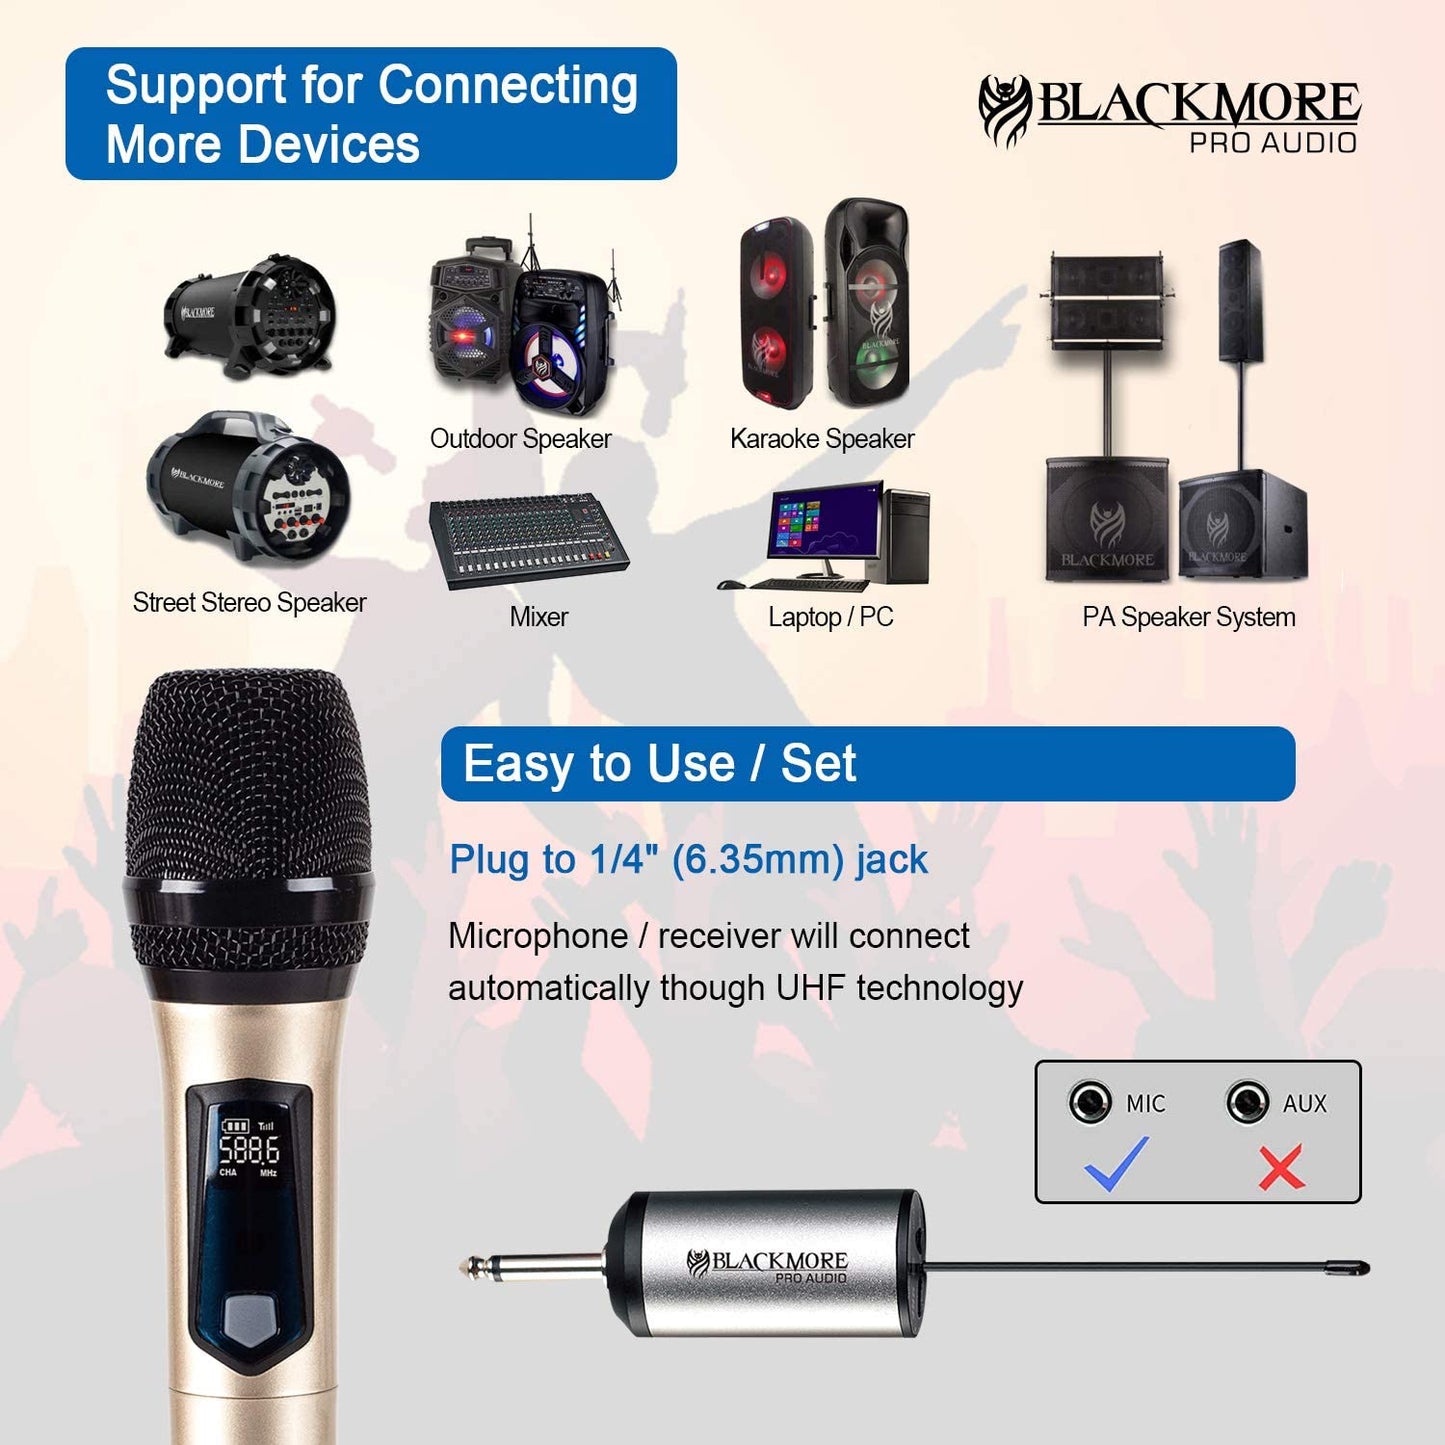 Blackmore Pro Audio BMP-13 UHF Wireless Handheld Dynamic Microphone System